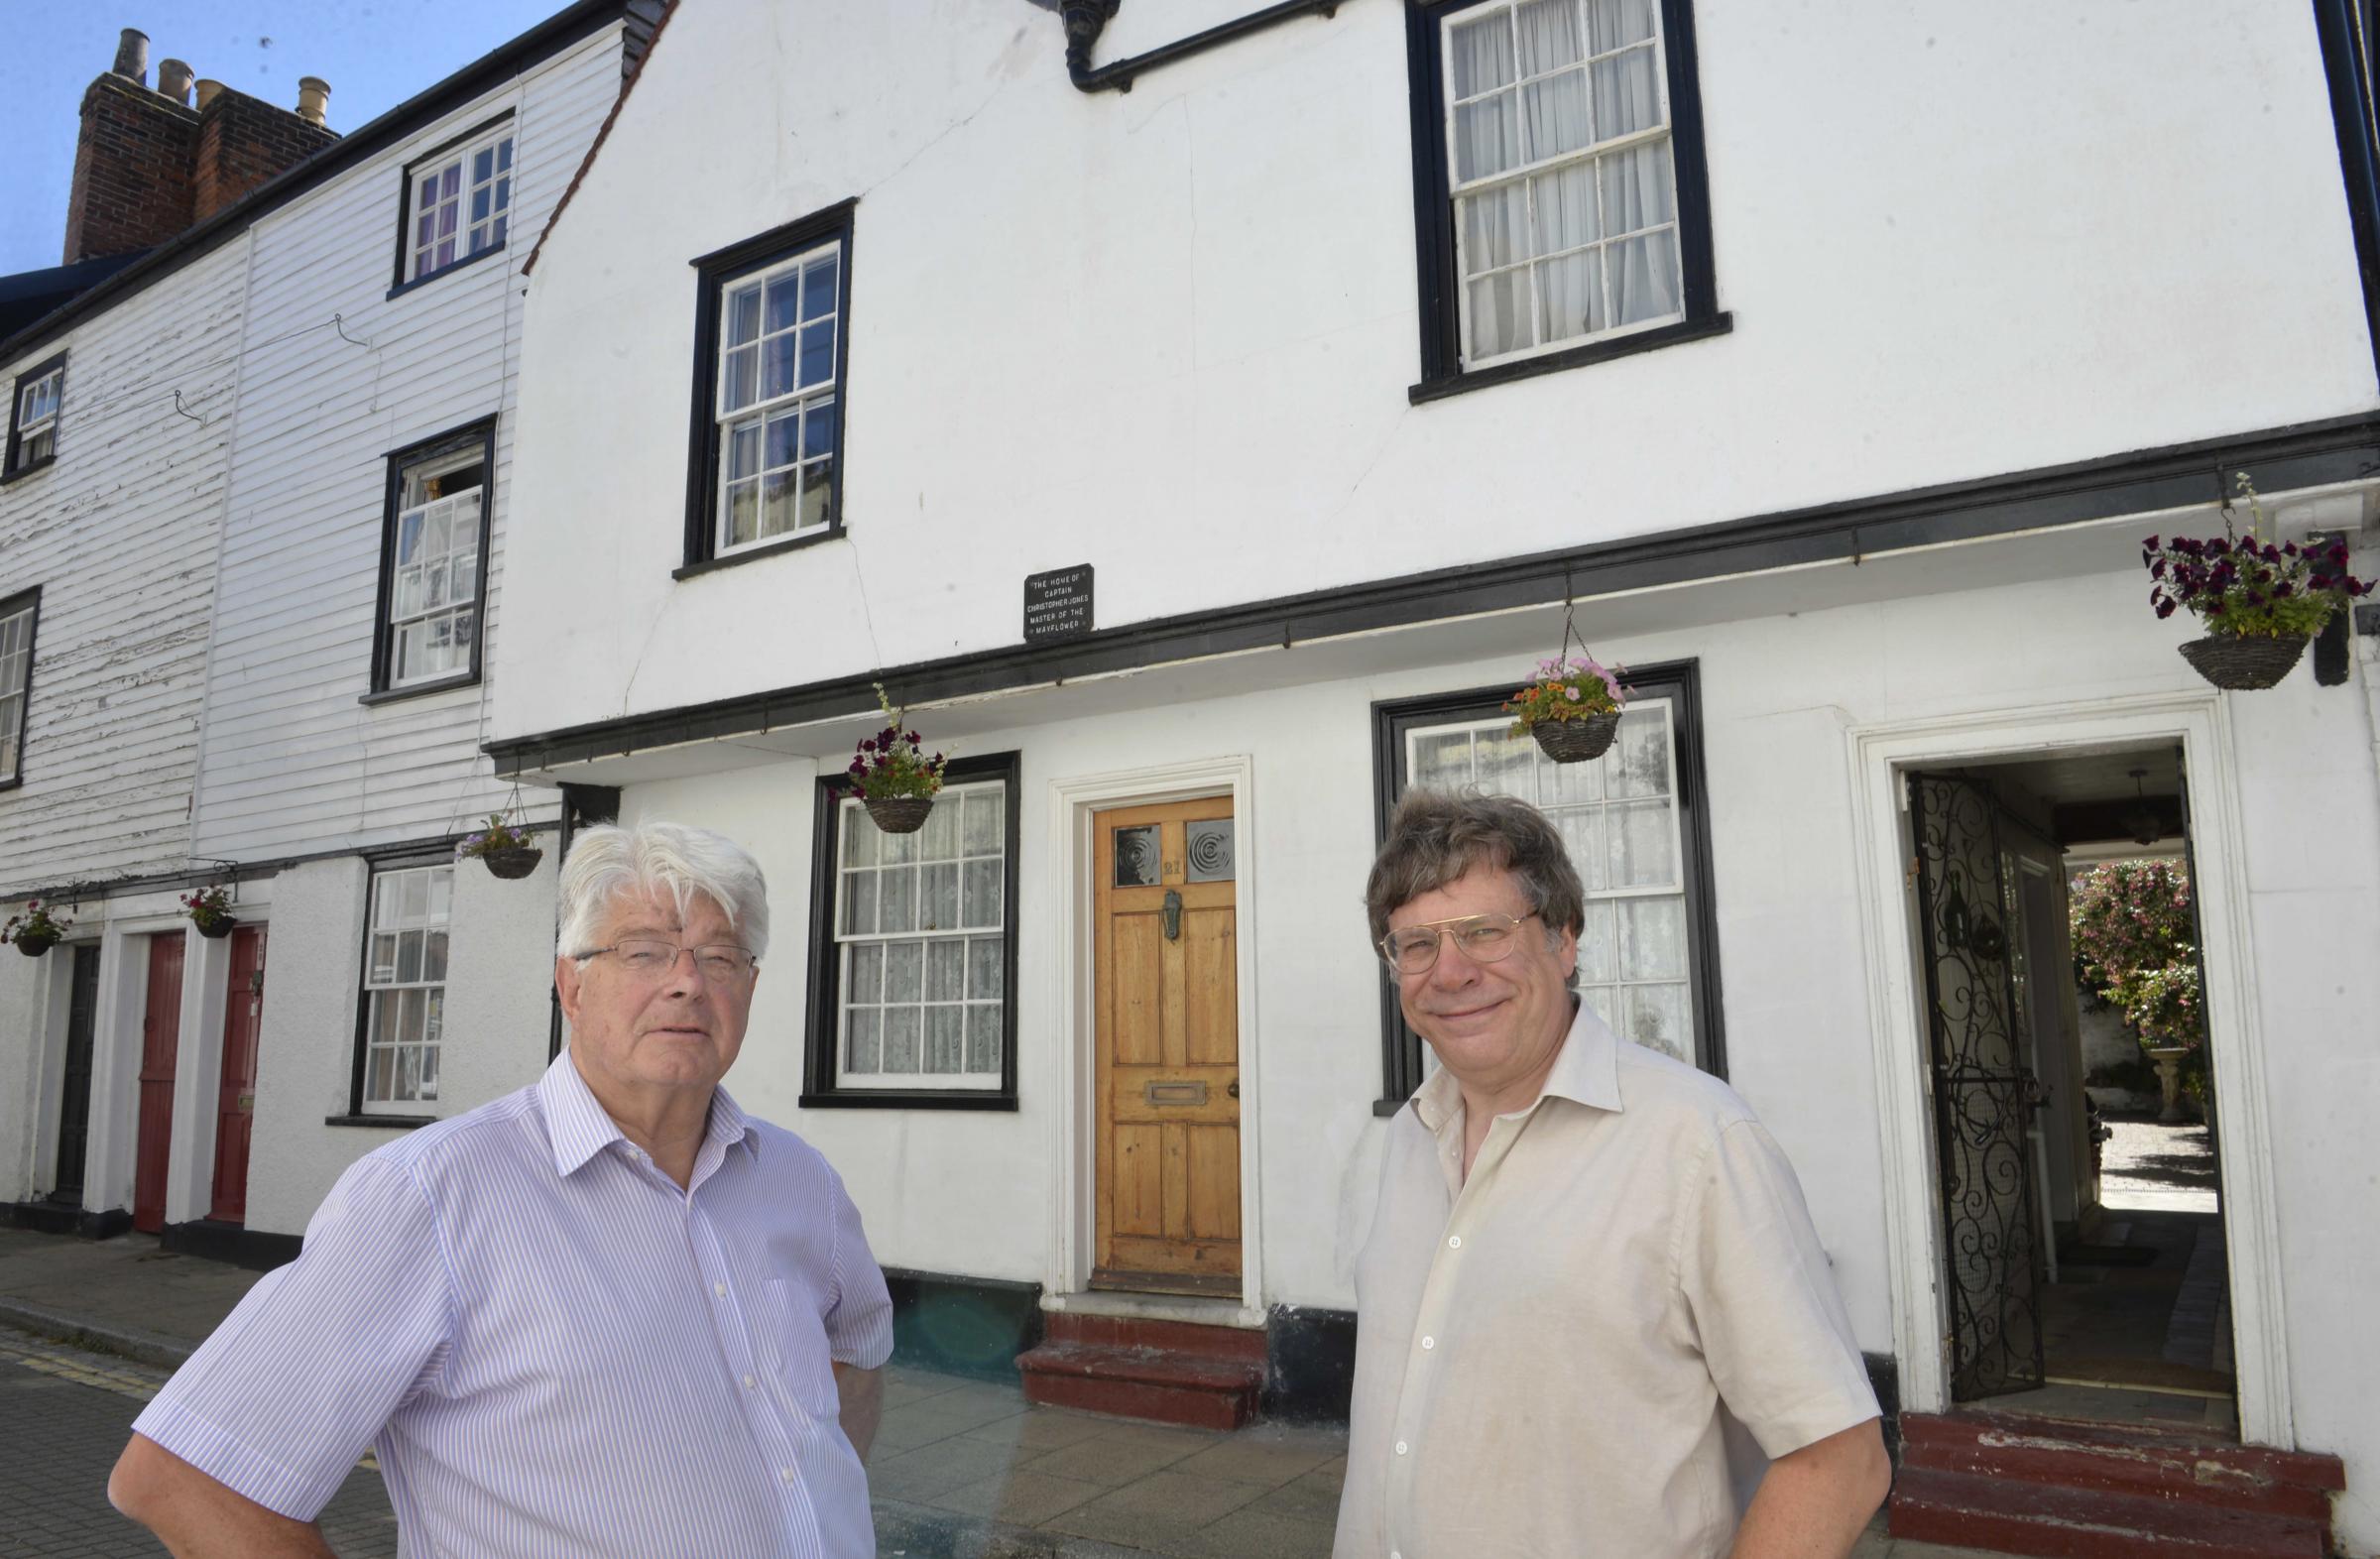 Stephen Dixon is restoring his home in Kings Head Street in Harwich, former home of Christopher Jones, Captain of the Mayflower..Stephen (right) with Terry Gregson from the Society Protecting Ancient Buildings..